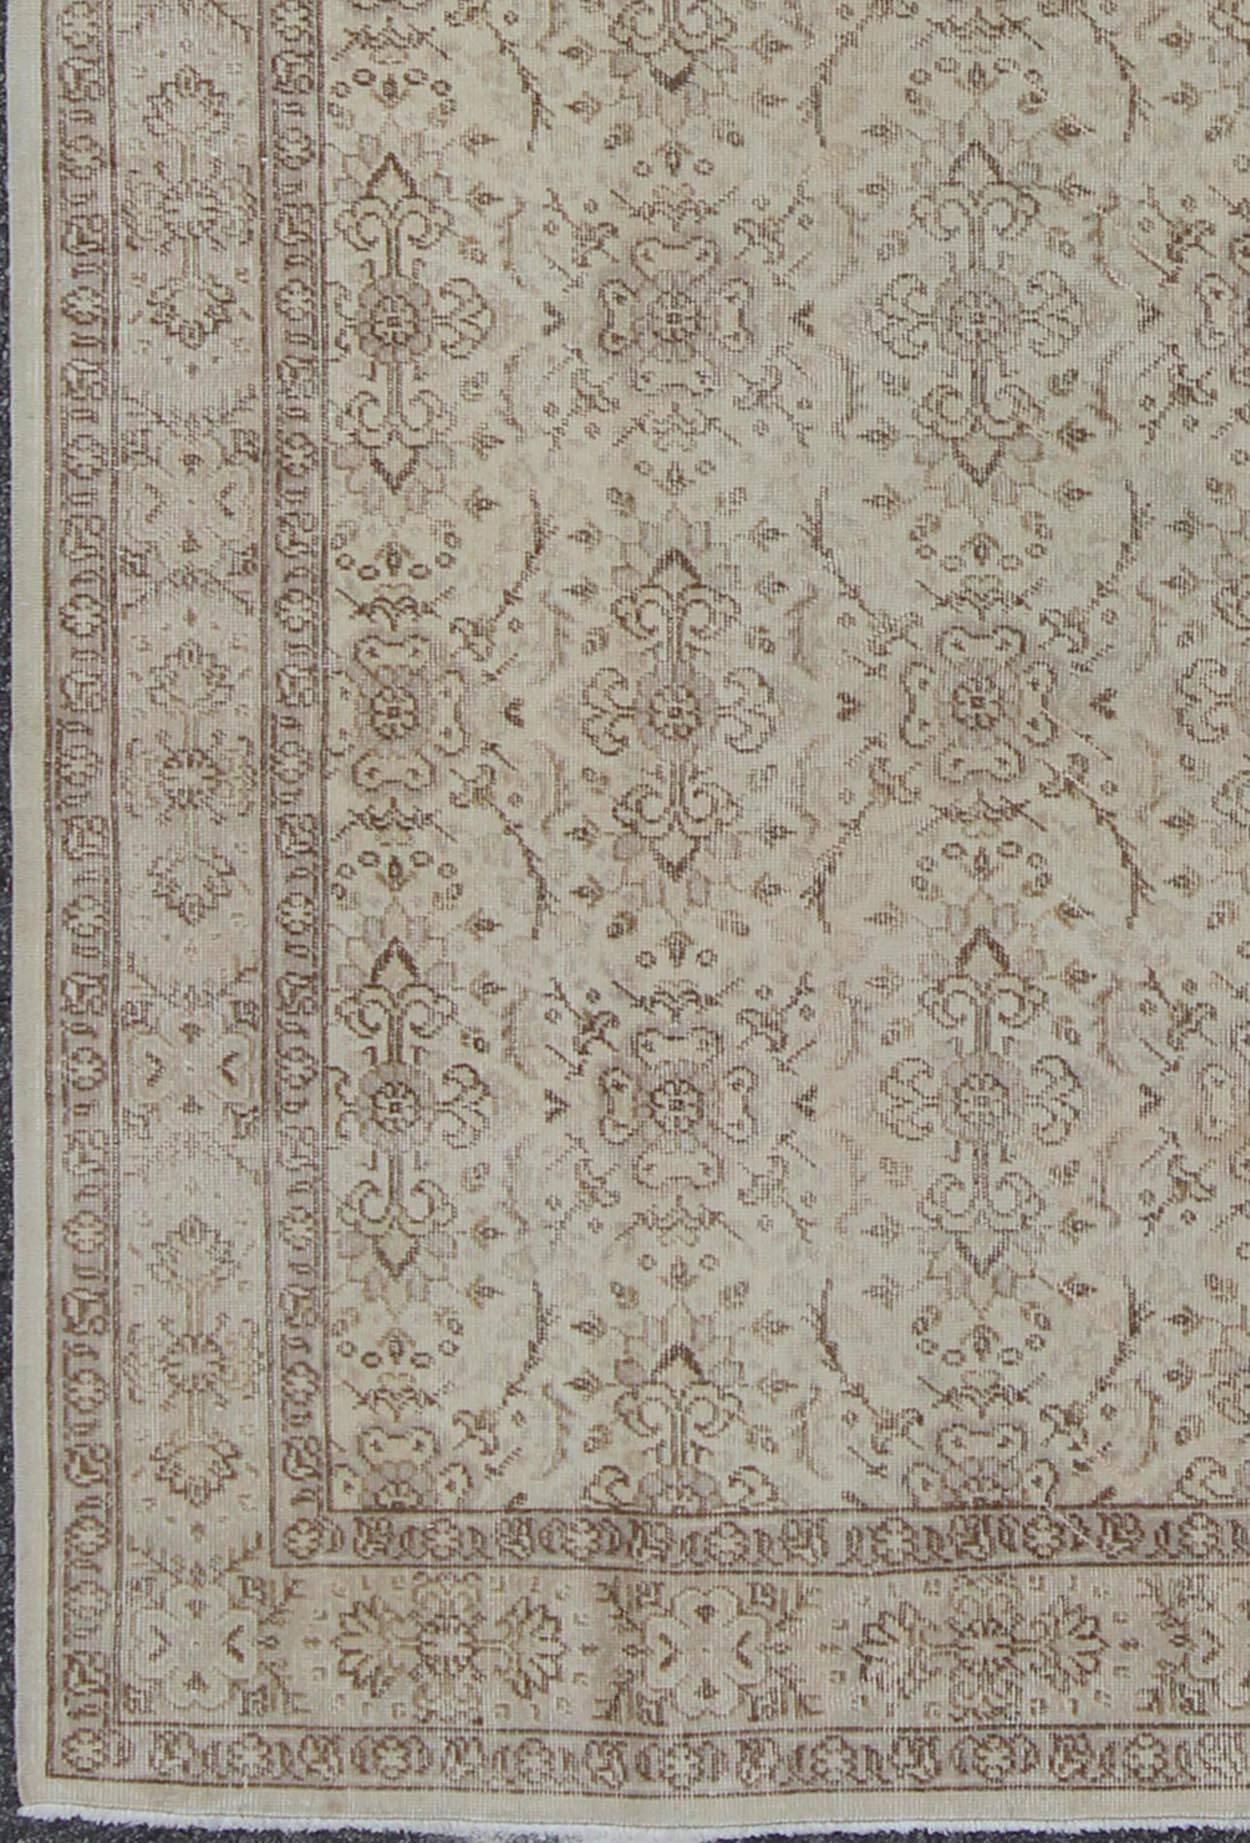 Vintage Turkish oushak carpet with botanical motifs set on an ivory ground vintage oushak. Keivan Woven Arts / Rug/EN-140567. 

The design of this beautiful vintage Oushak rug from mid-20th century Turkey is enhanced by its lustrous wool. The